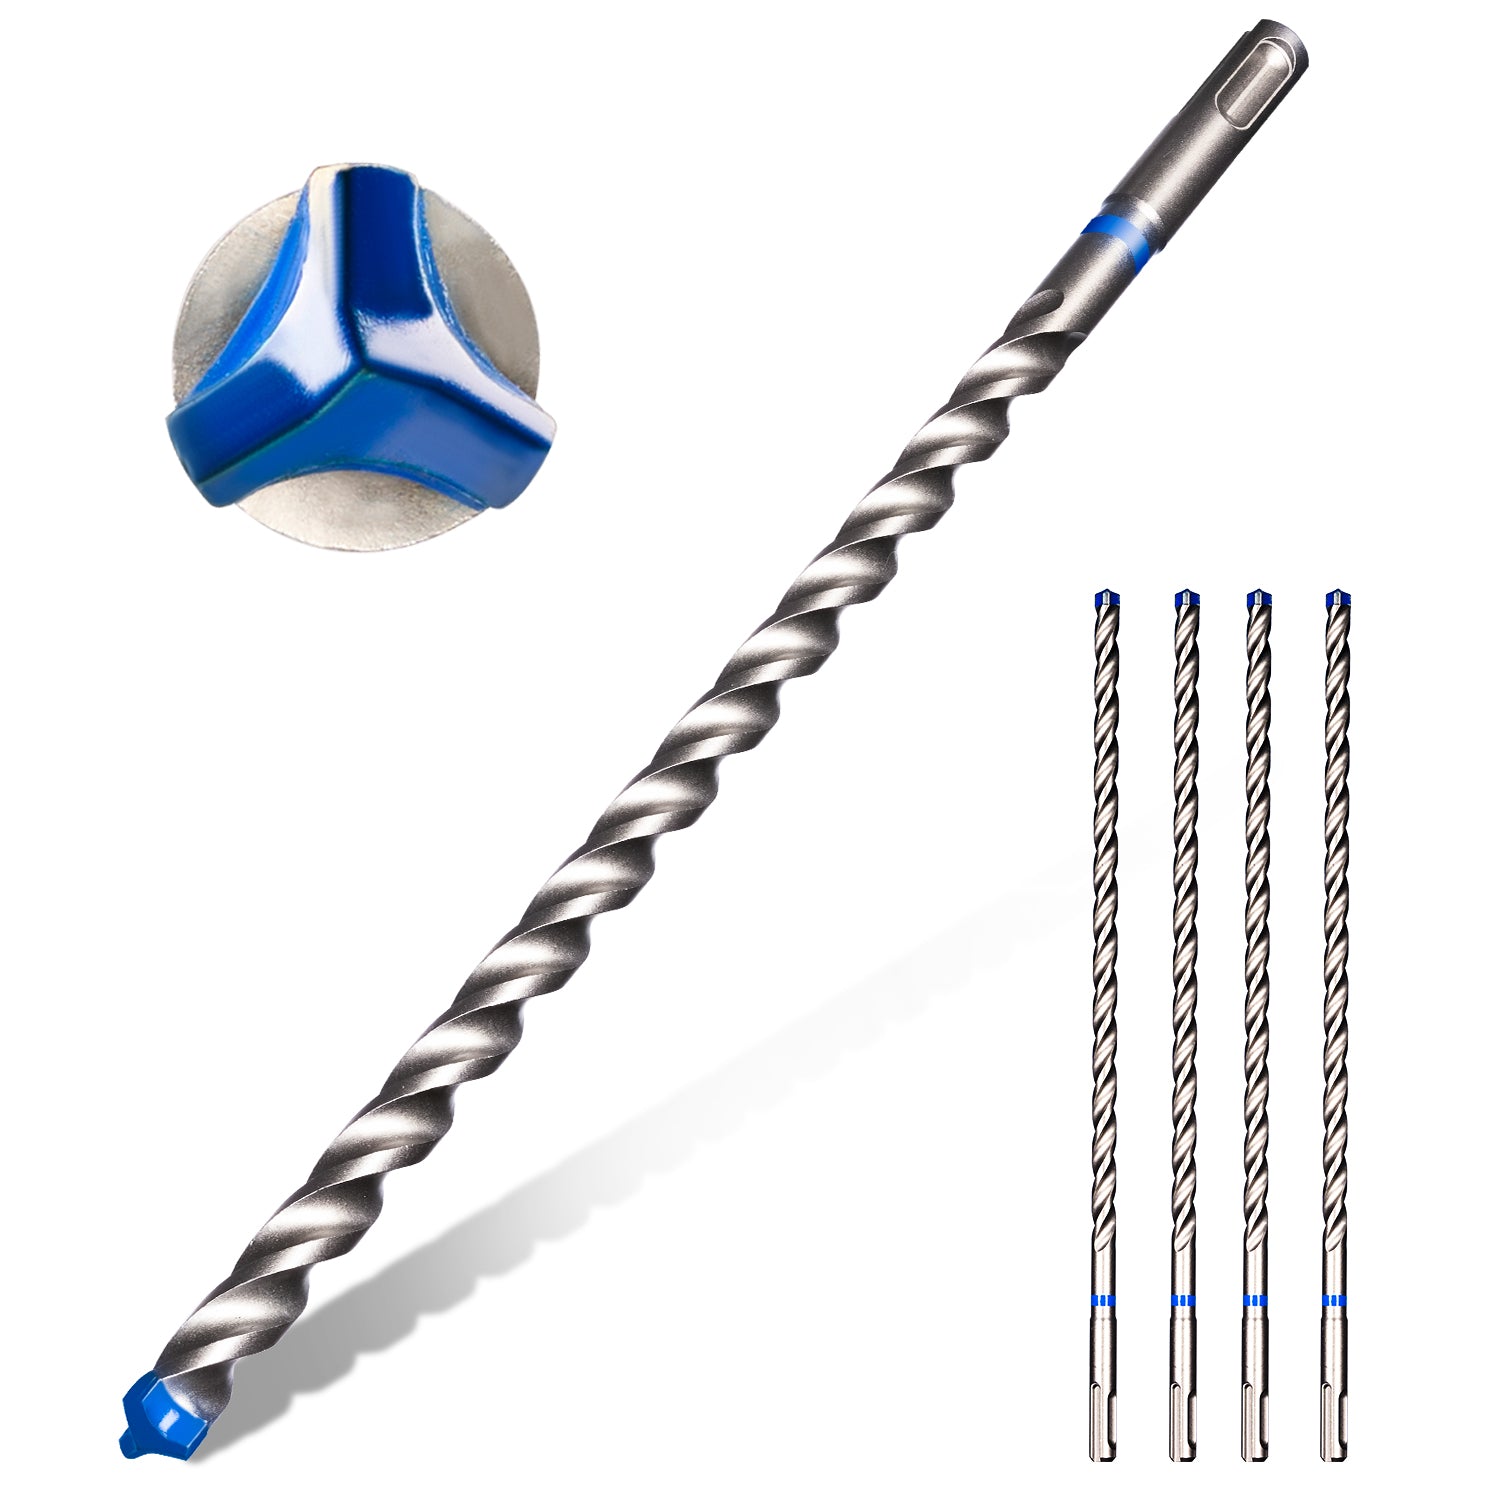 SDS Plus Rotary Hammer Drill Bits with Carbide-Tip for Bricks, Blocks